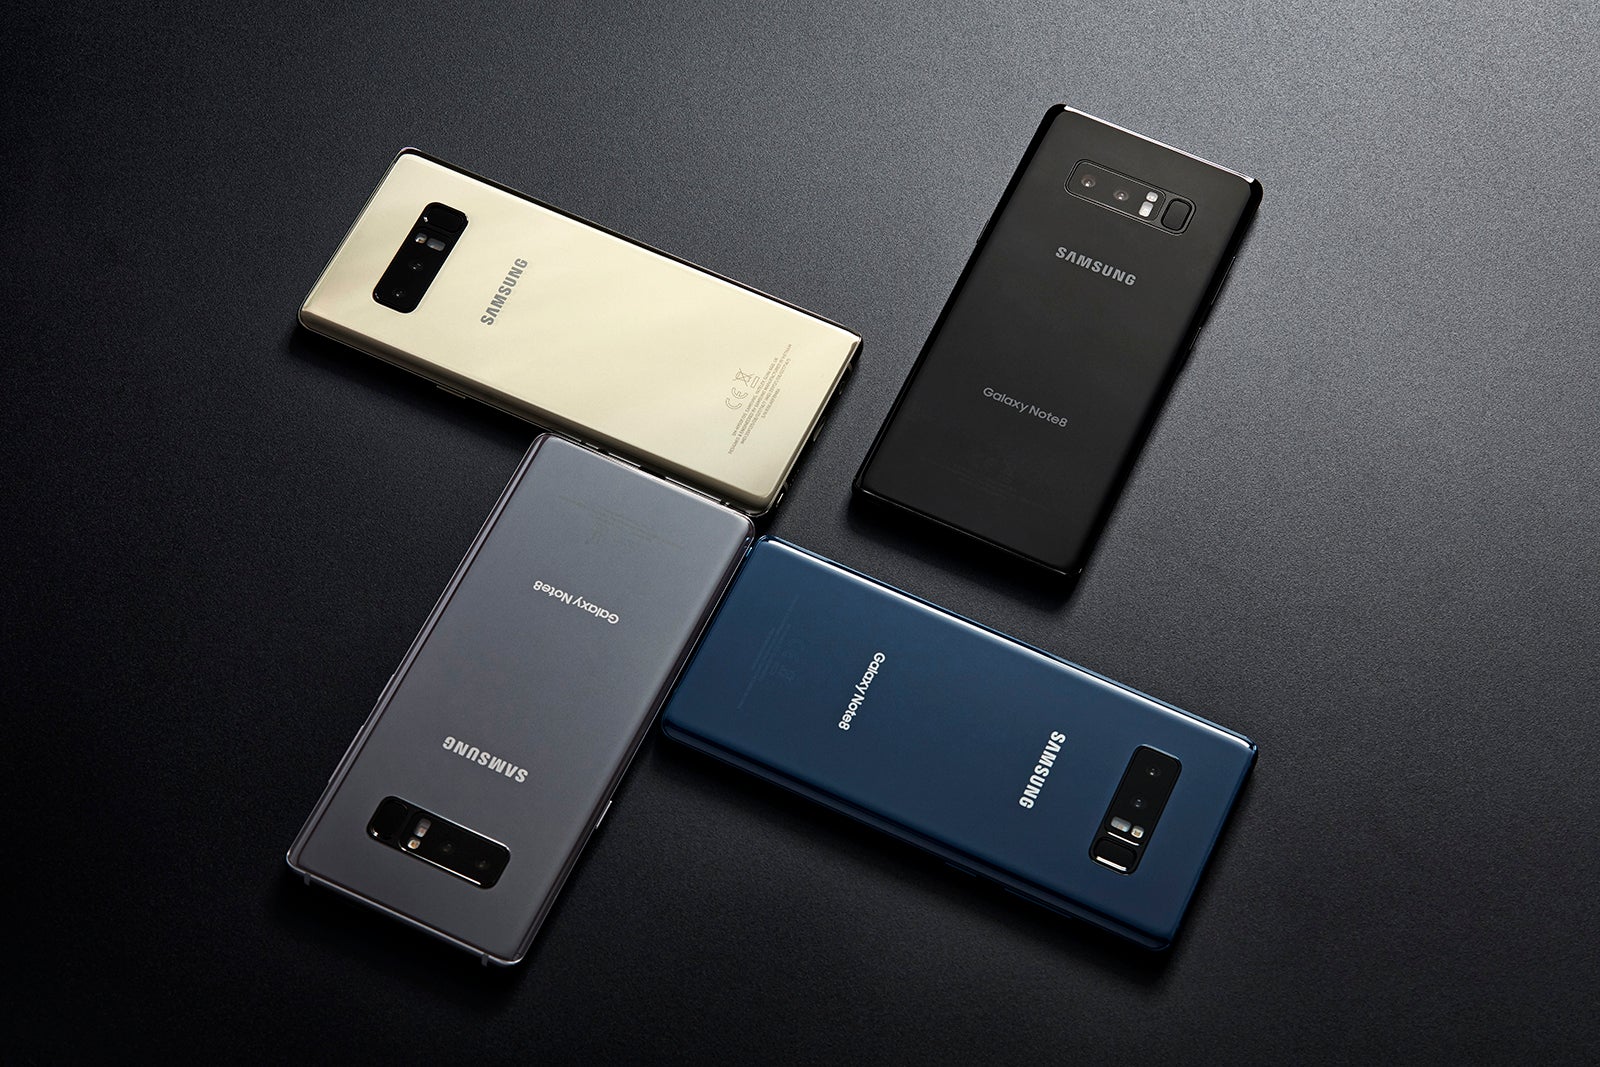 The Note 8 in (clockwise) Midnight Black, Deepsea Blue, Orchid Grey, and Maple Gold - The Samsung Galaxy Note 8 is now official: Productivity overwhelming!